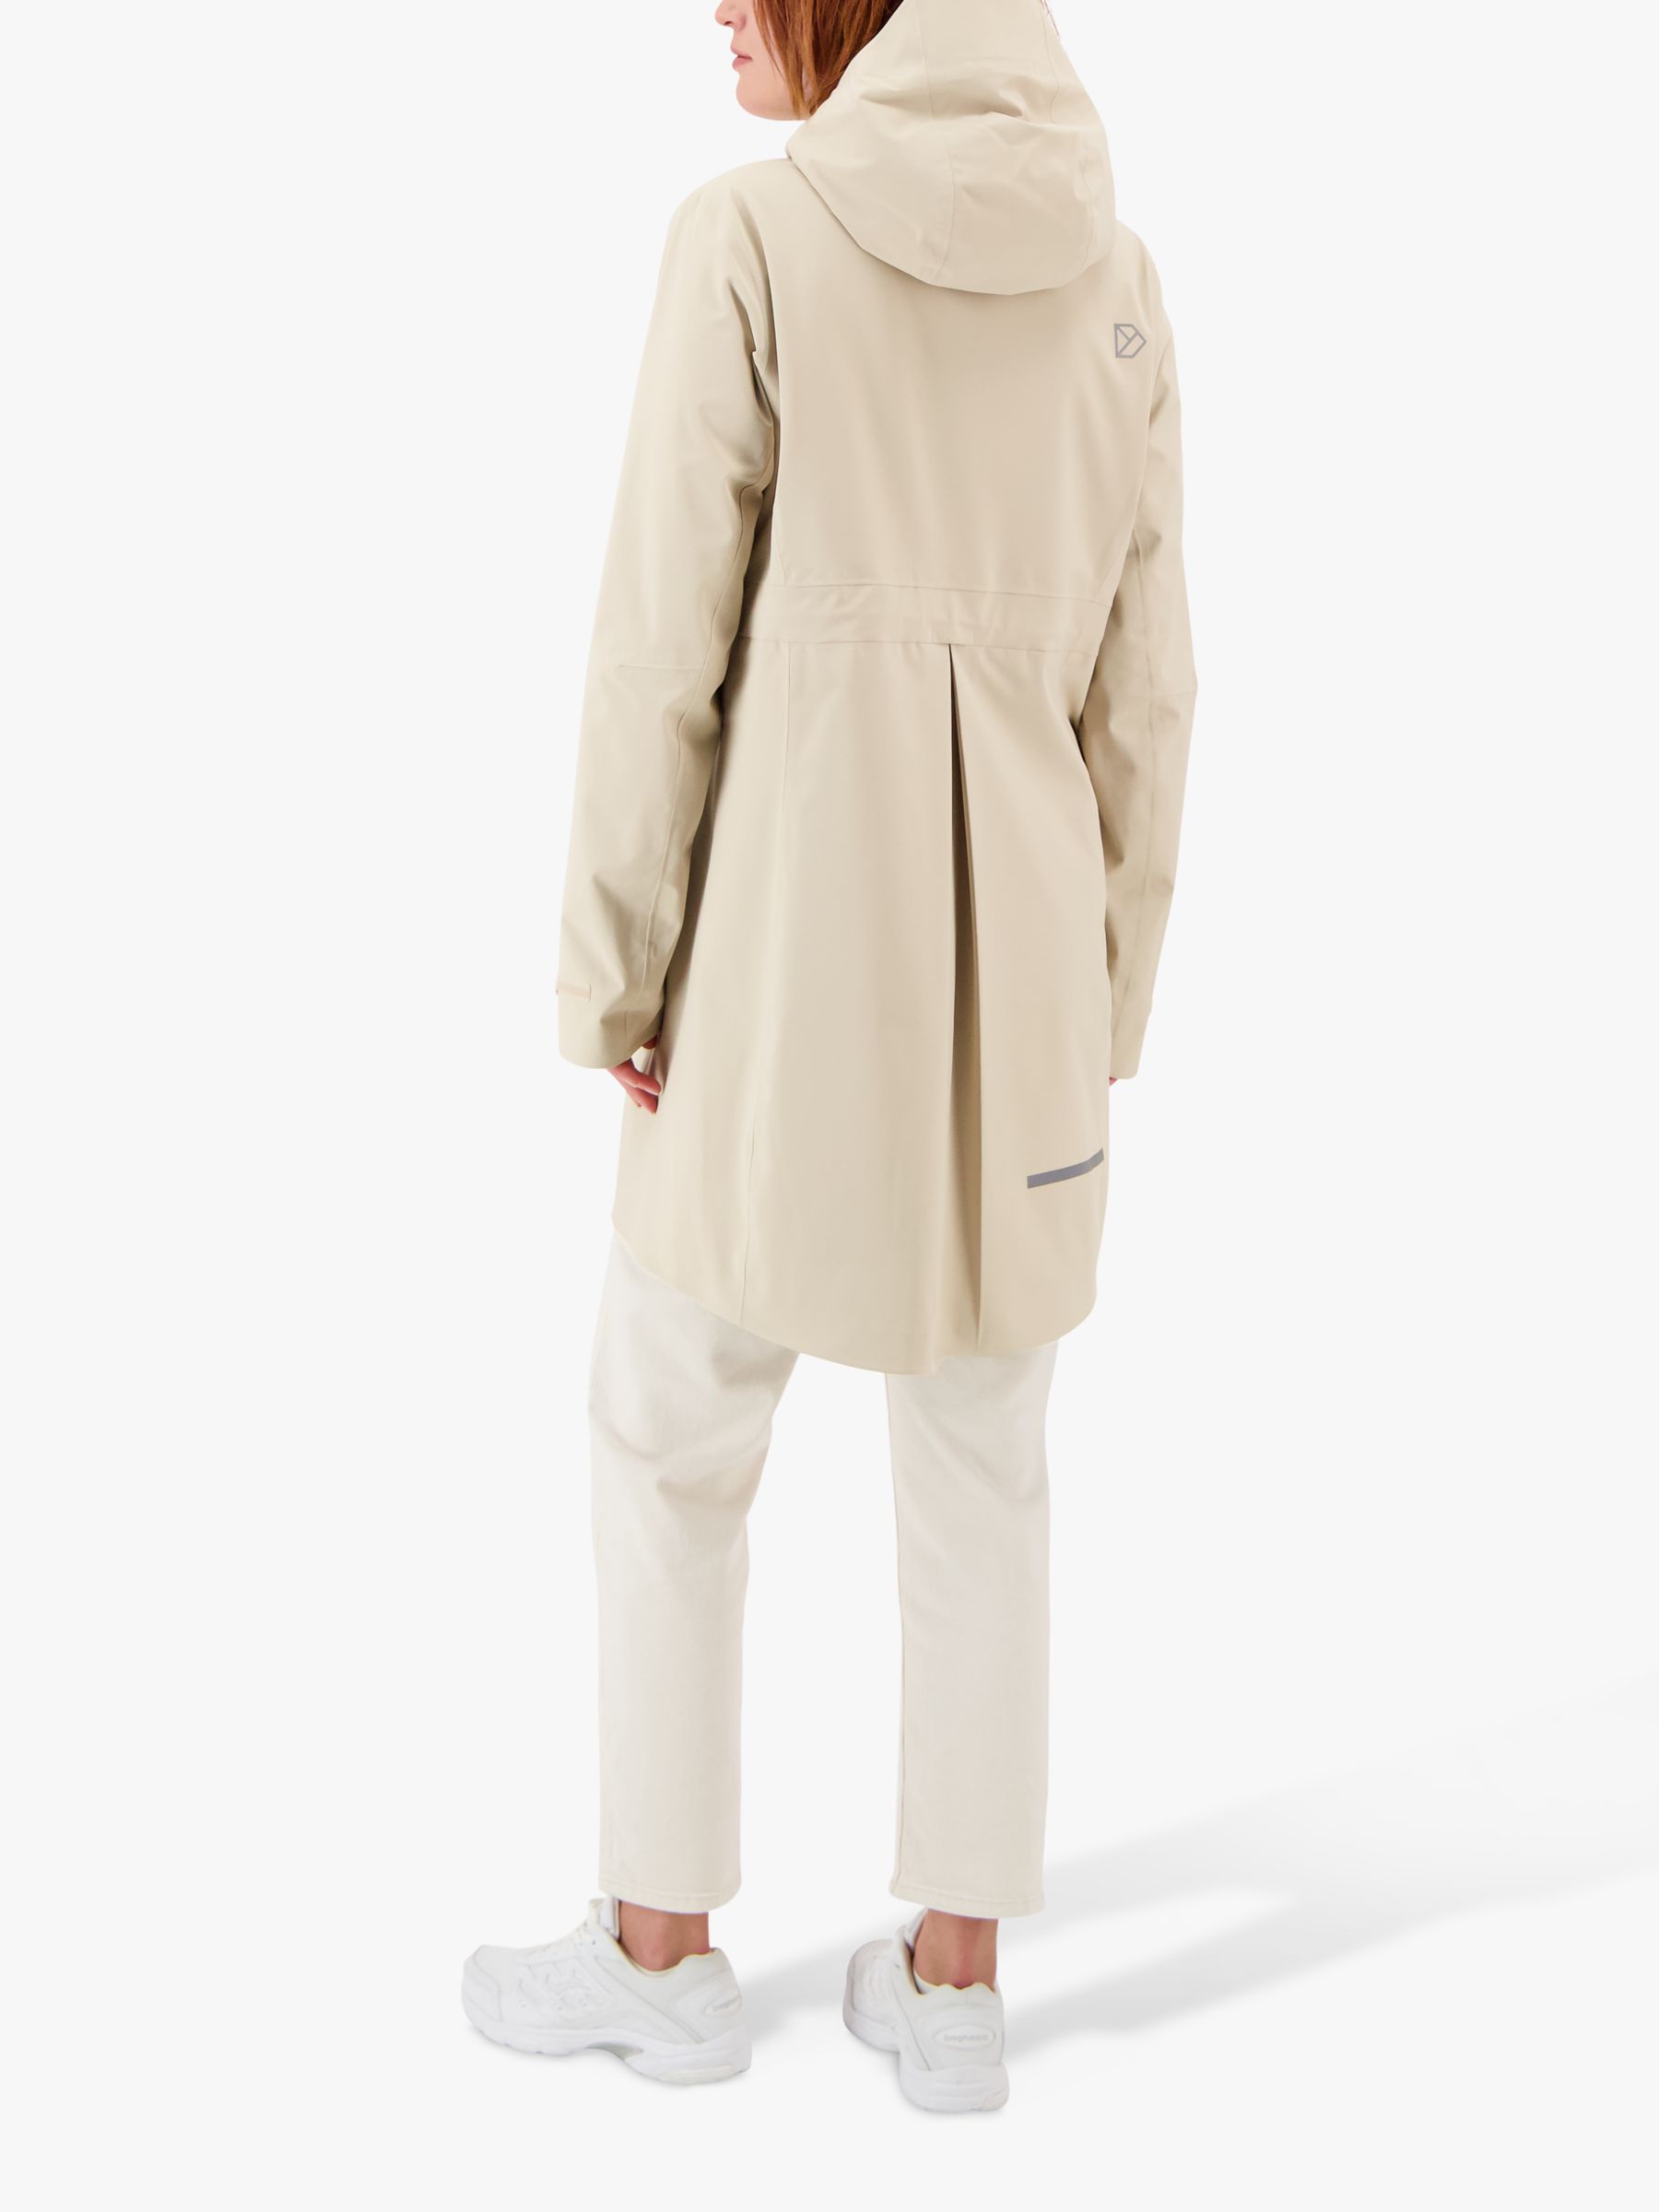 Didriksons Bea Parka Jacket, Clay Beige at John Lewis & Partners